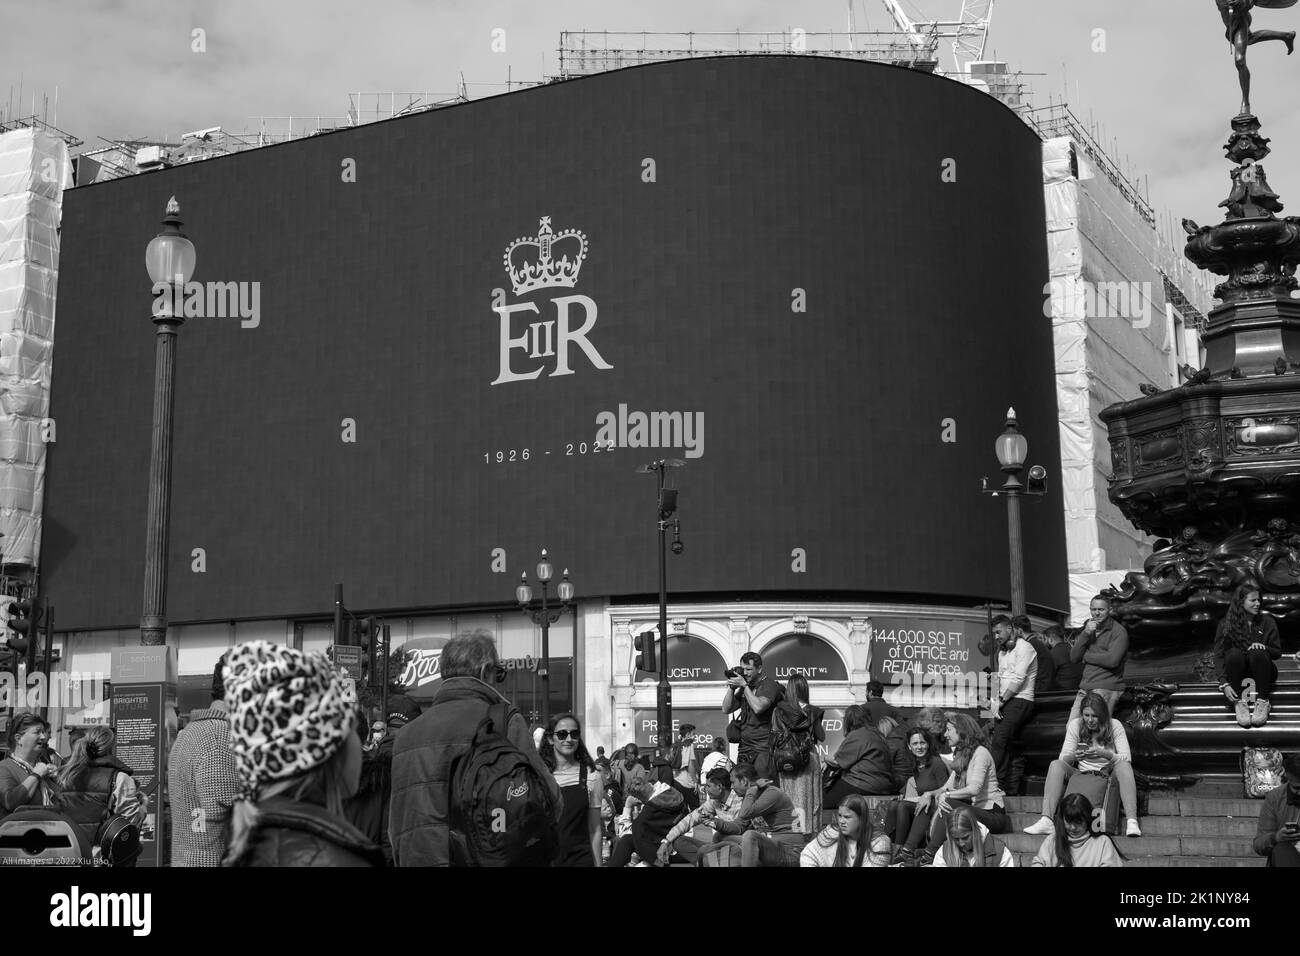 London UK, 9th September 2022. The Royal Cypher EIIR is displayed on digital bill board across west end central London in paying tribute to Her Majesty The Queen and commemorate her long service to our nation. Credit: Xiu Bao/Alamy Live News Stock Photo